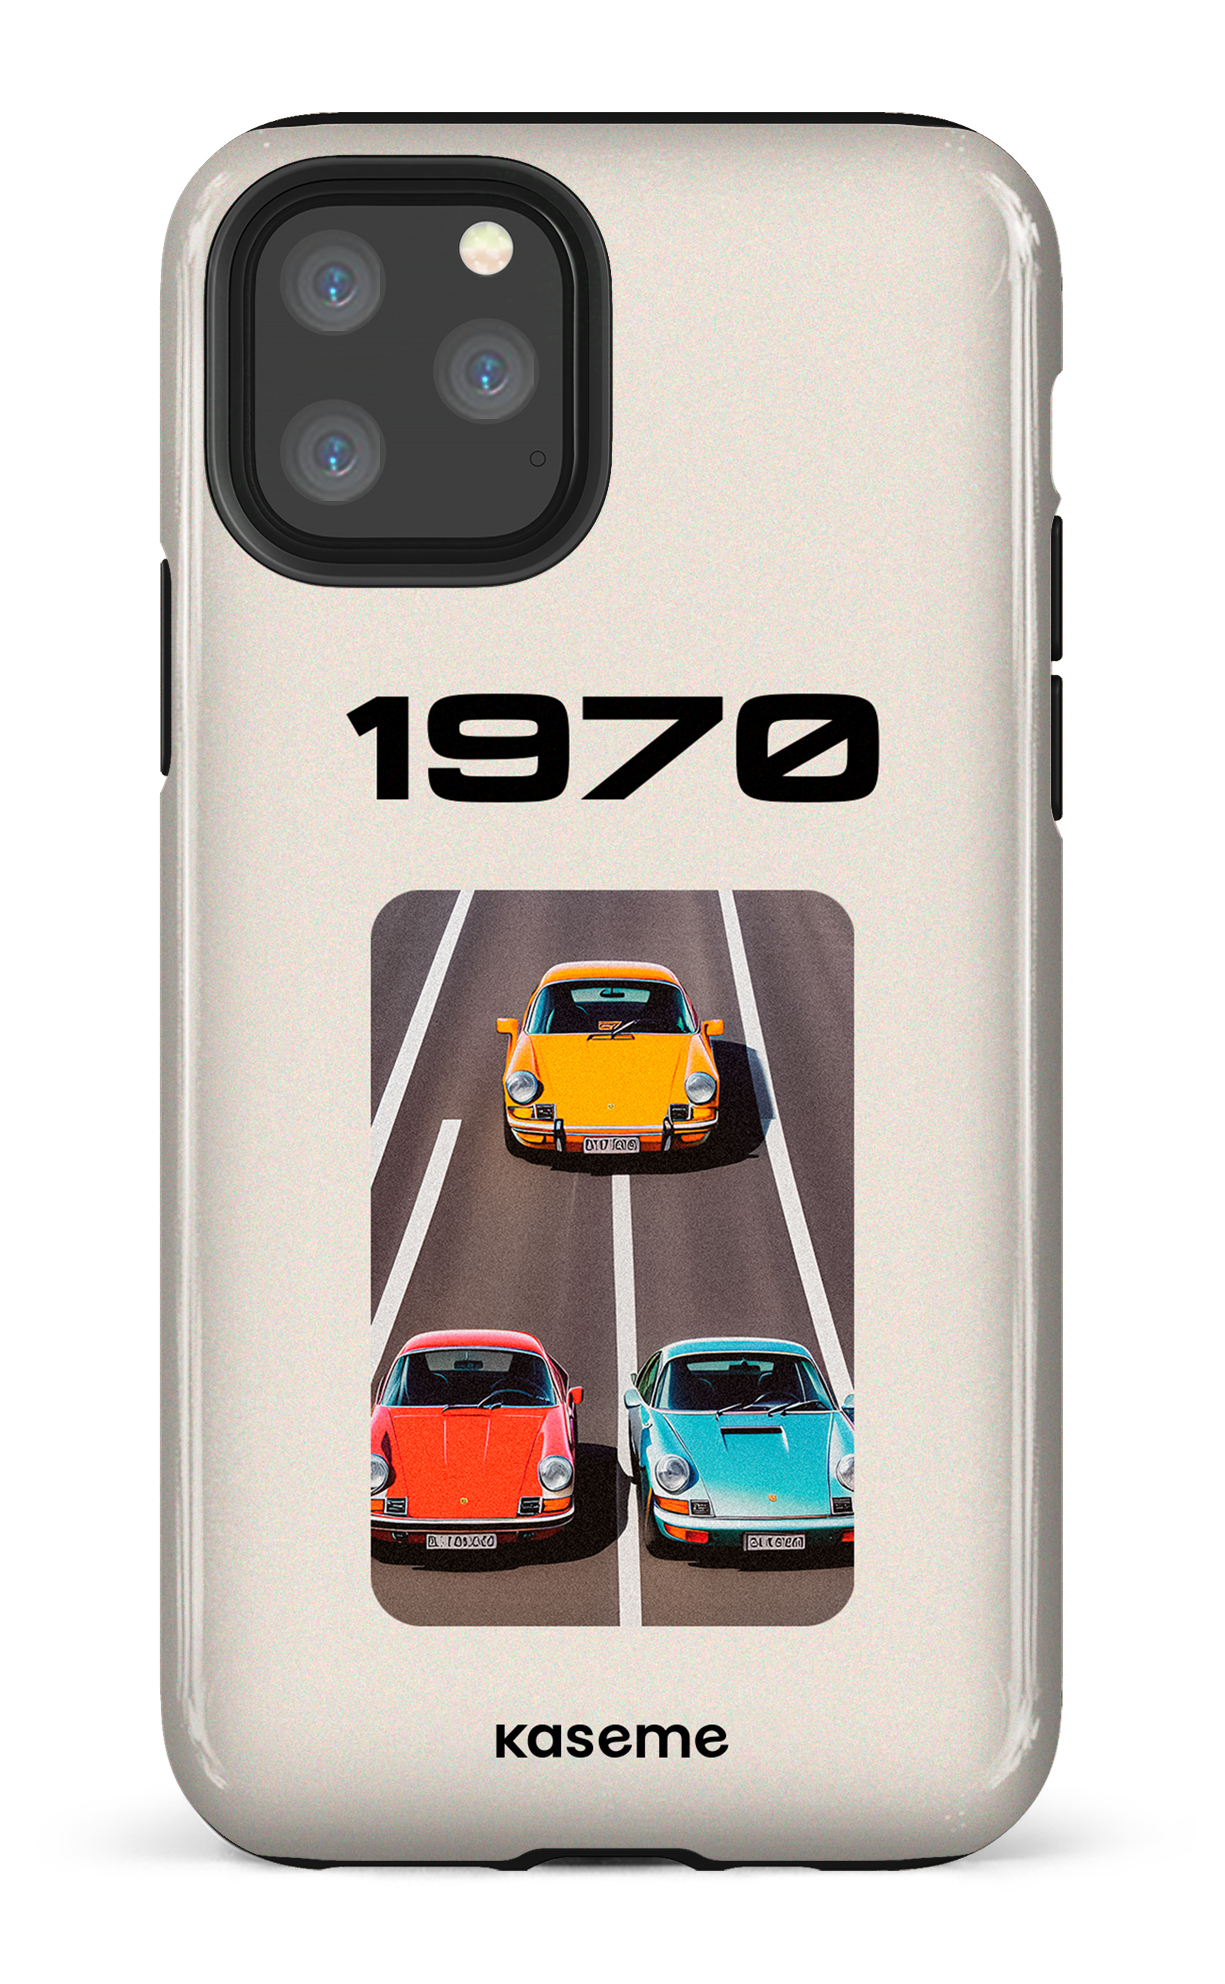 The 1970 - iPhone 11 Pro